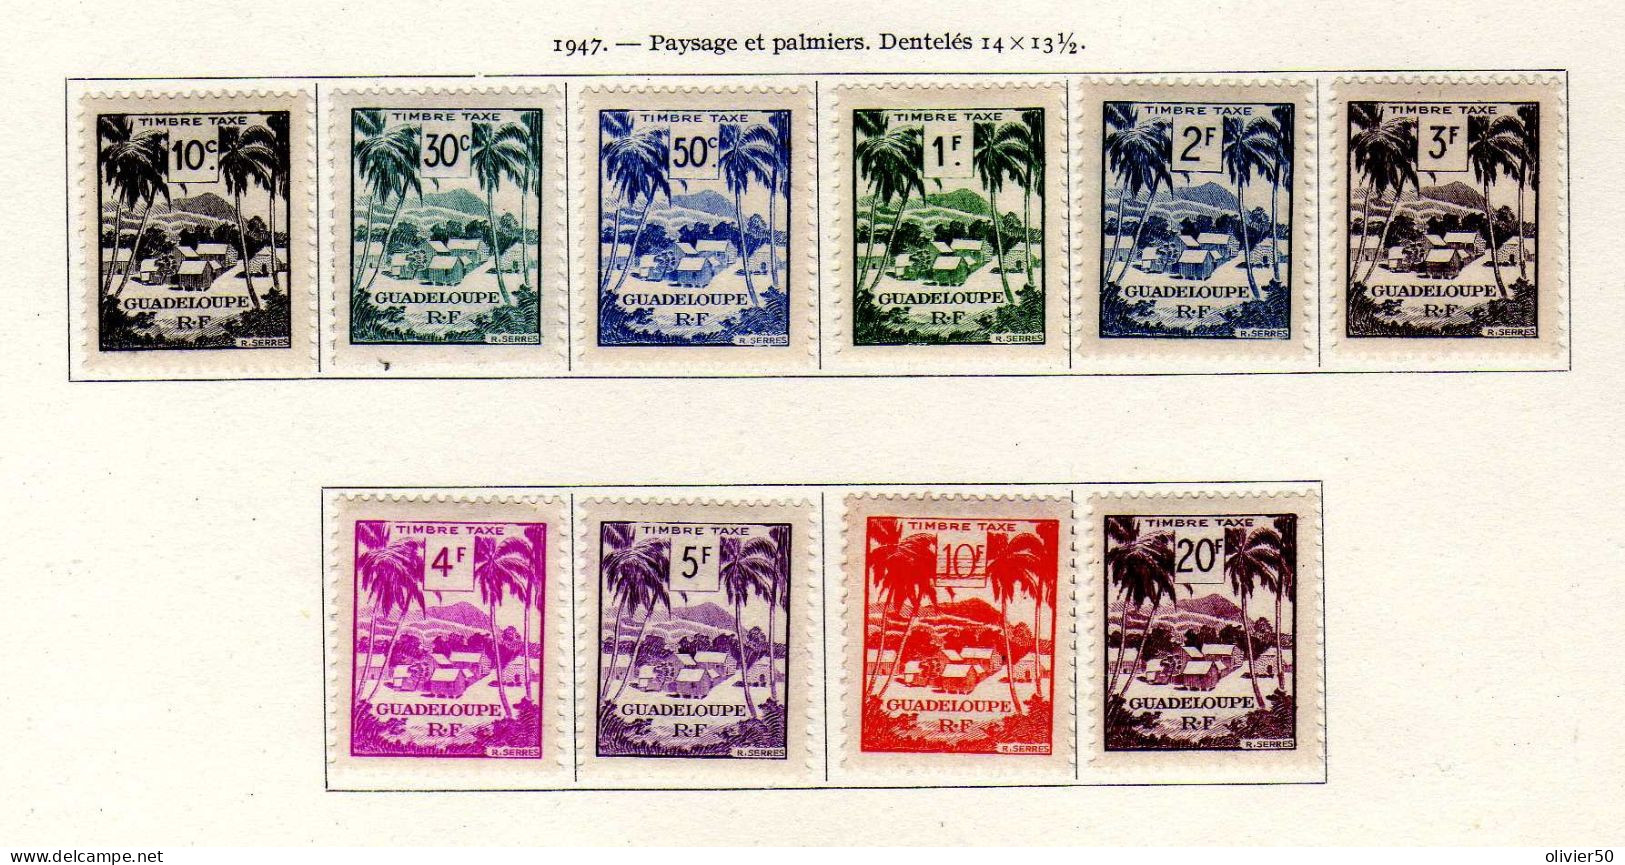 Guadeloupe - 1947 - Timbres-Taxe Palmiers - Neufs* - MH - Impuestos